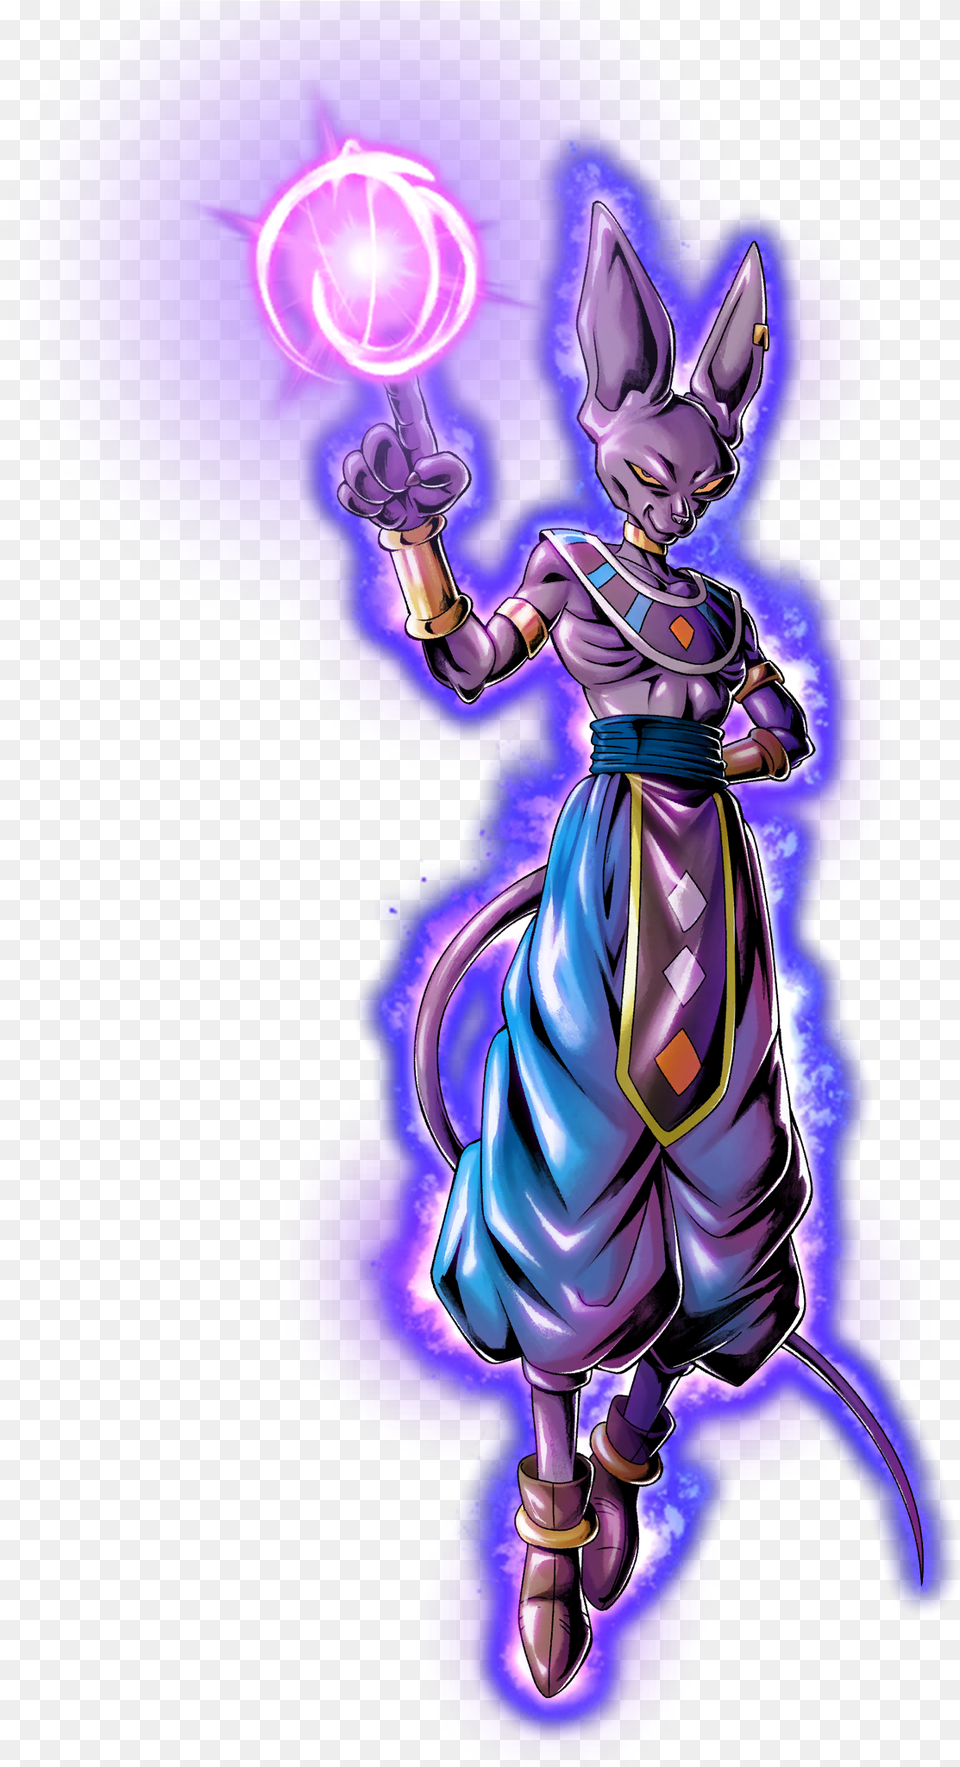 Download View Fullsize Beerus Image Purple Guy In Dragon Ball Z, Book, Comics, Publication, Light Free Transparent Png